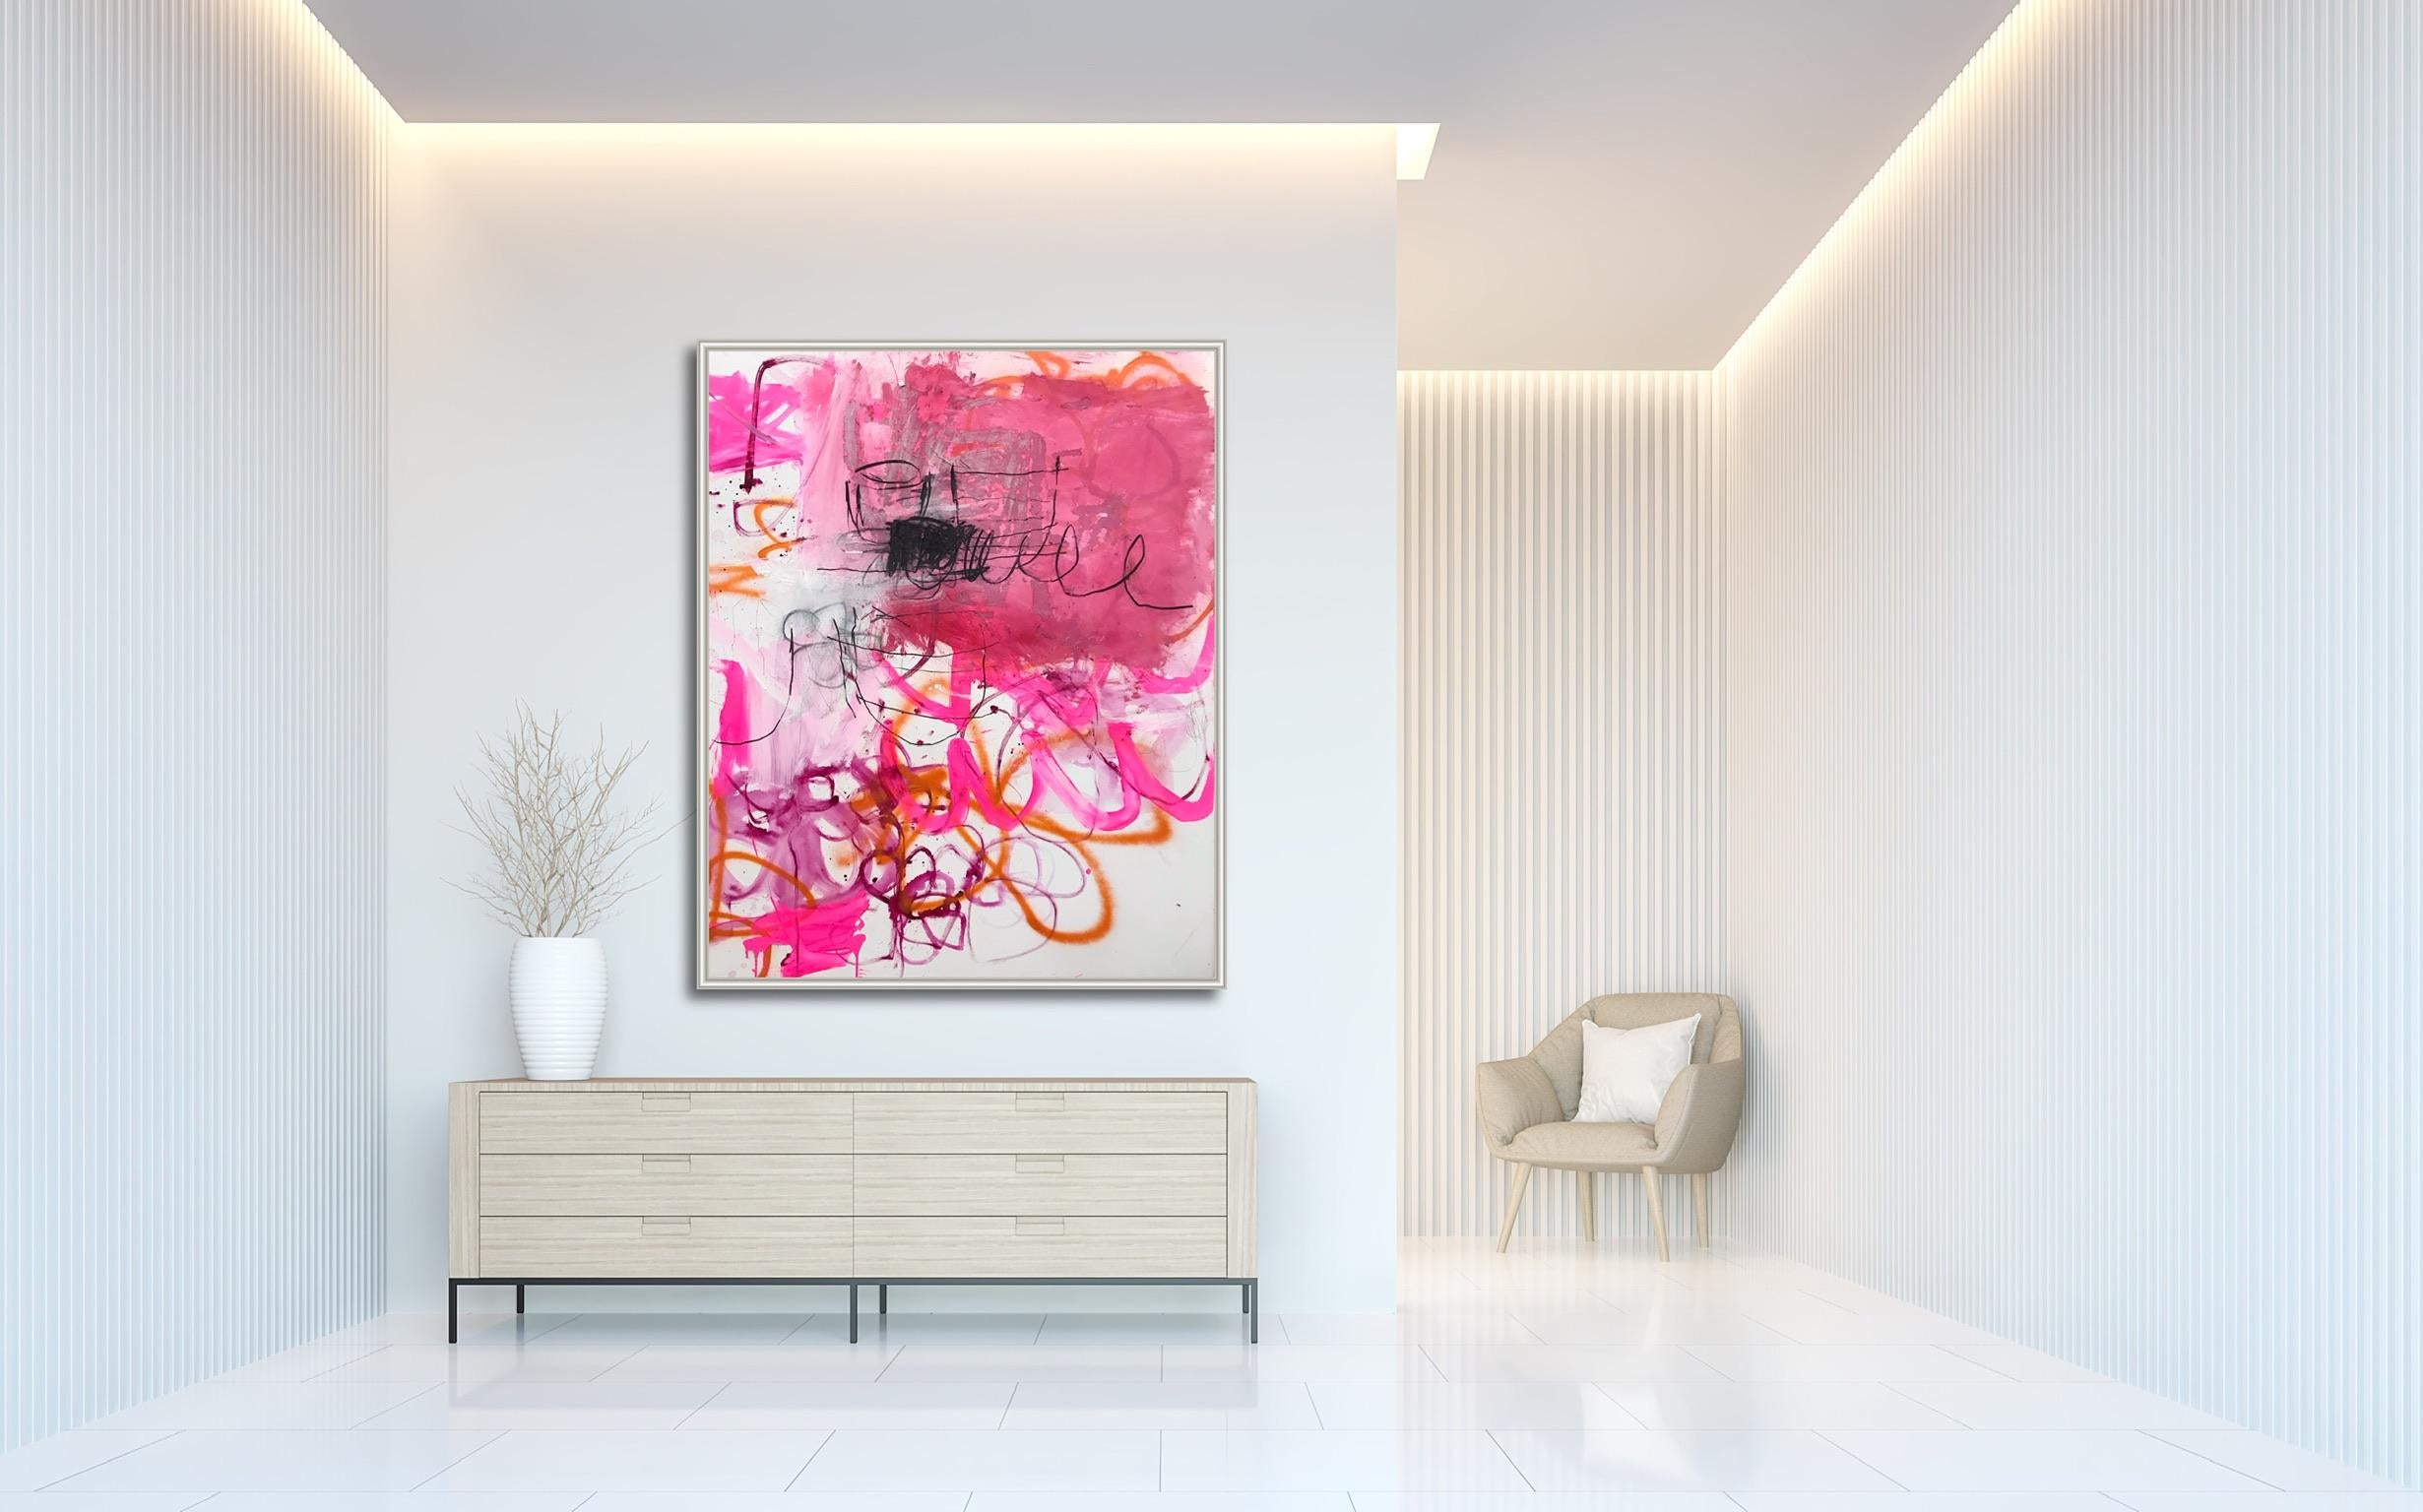 Floral encounters, suddenly (Abstract painting) - Painting by Manuela Karin Knaut